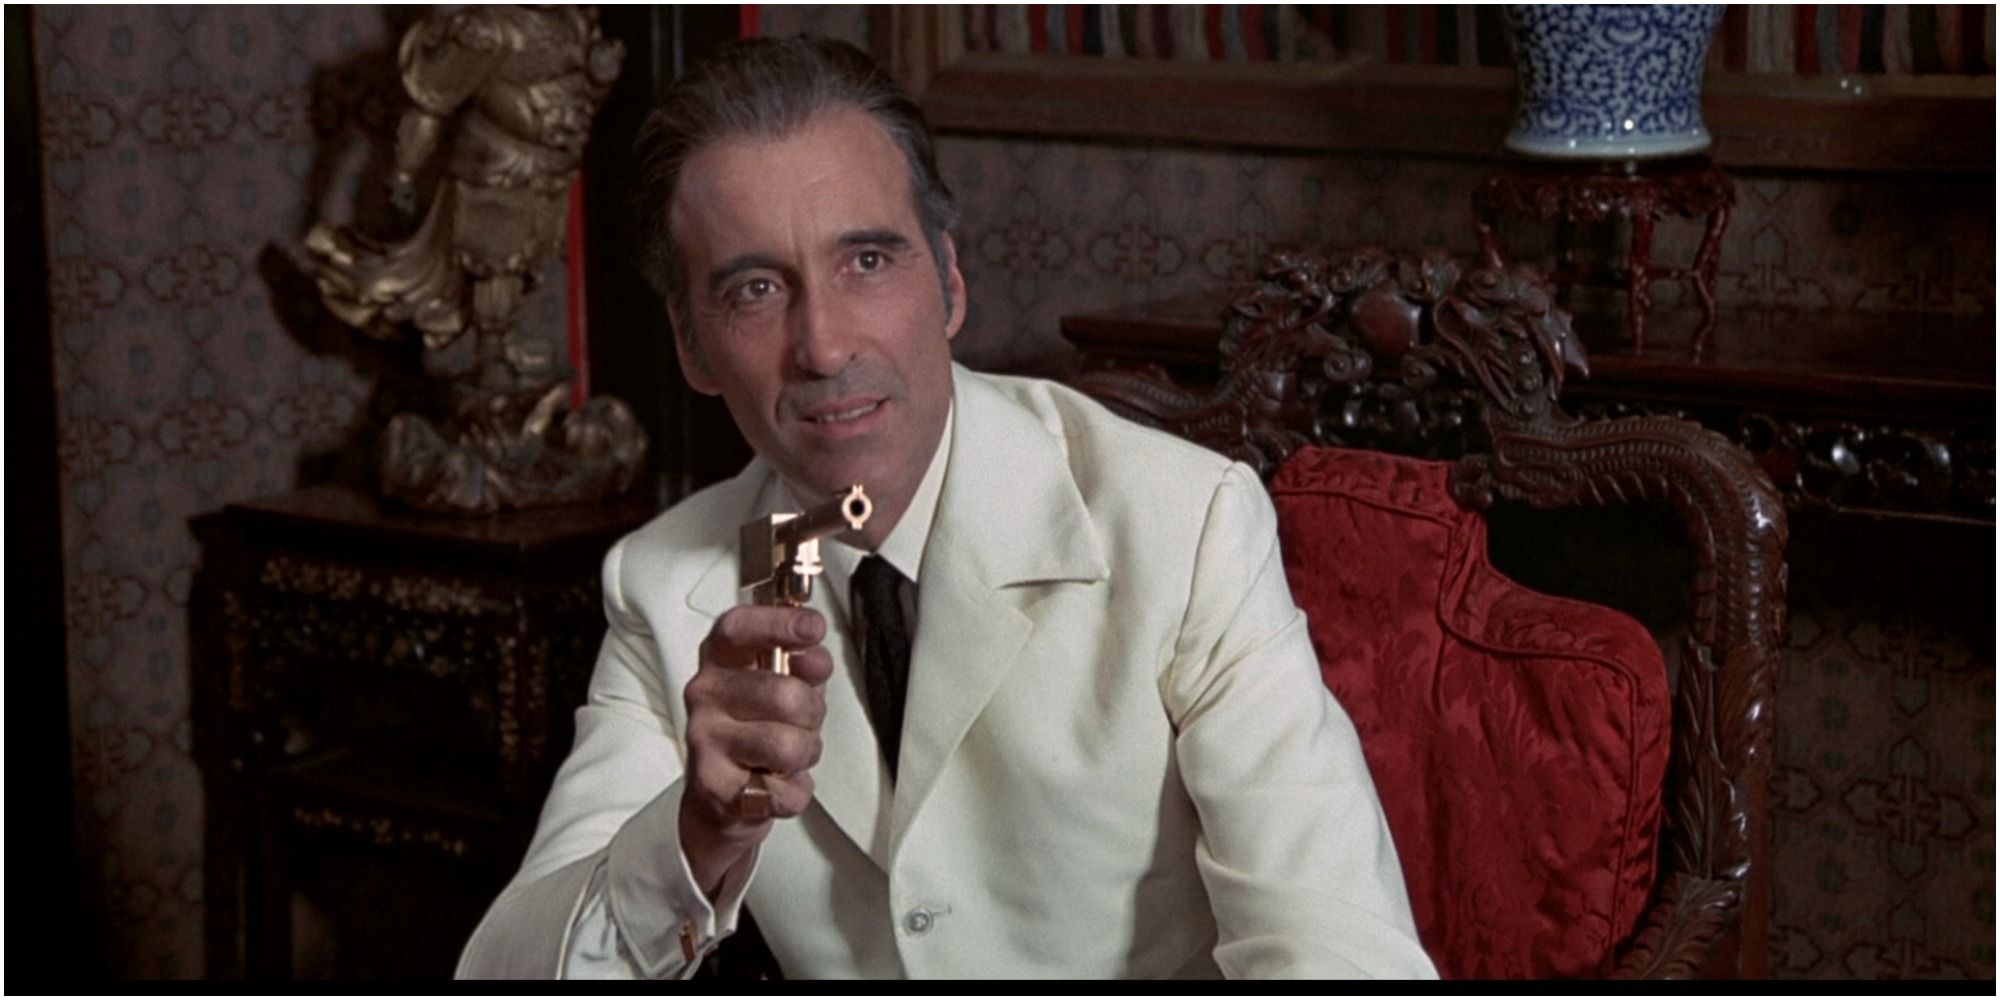 Scaramange points his gun at his mistress in The Man With The Golden Gun